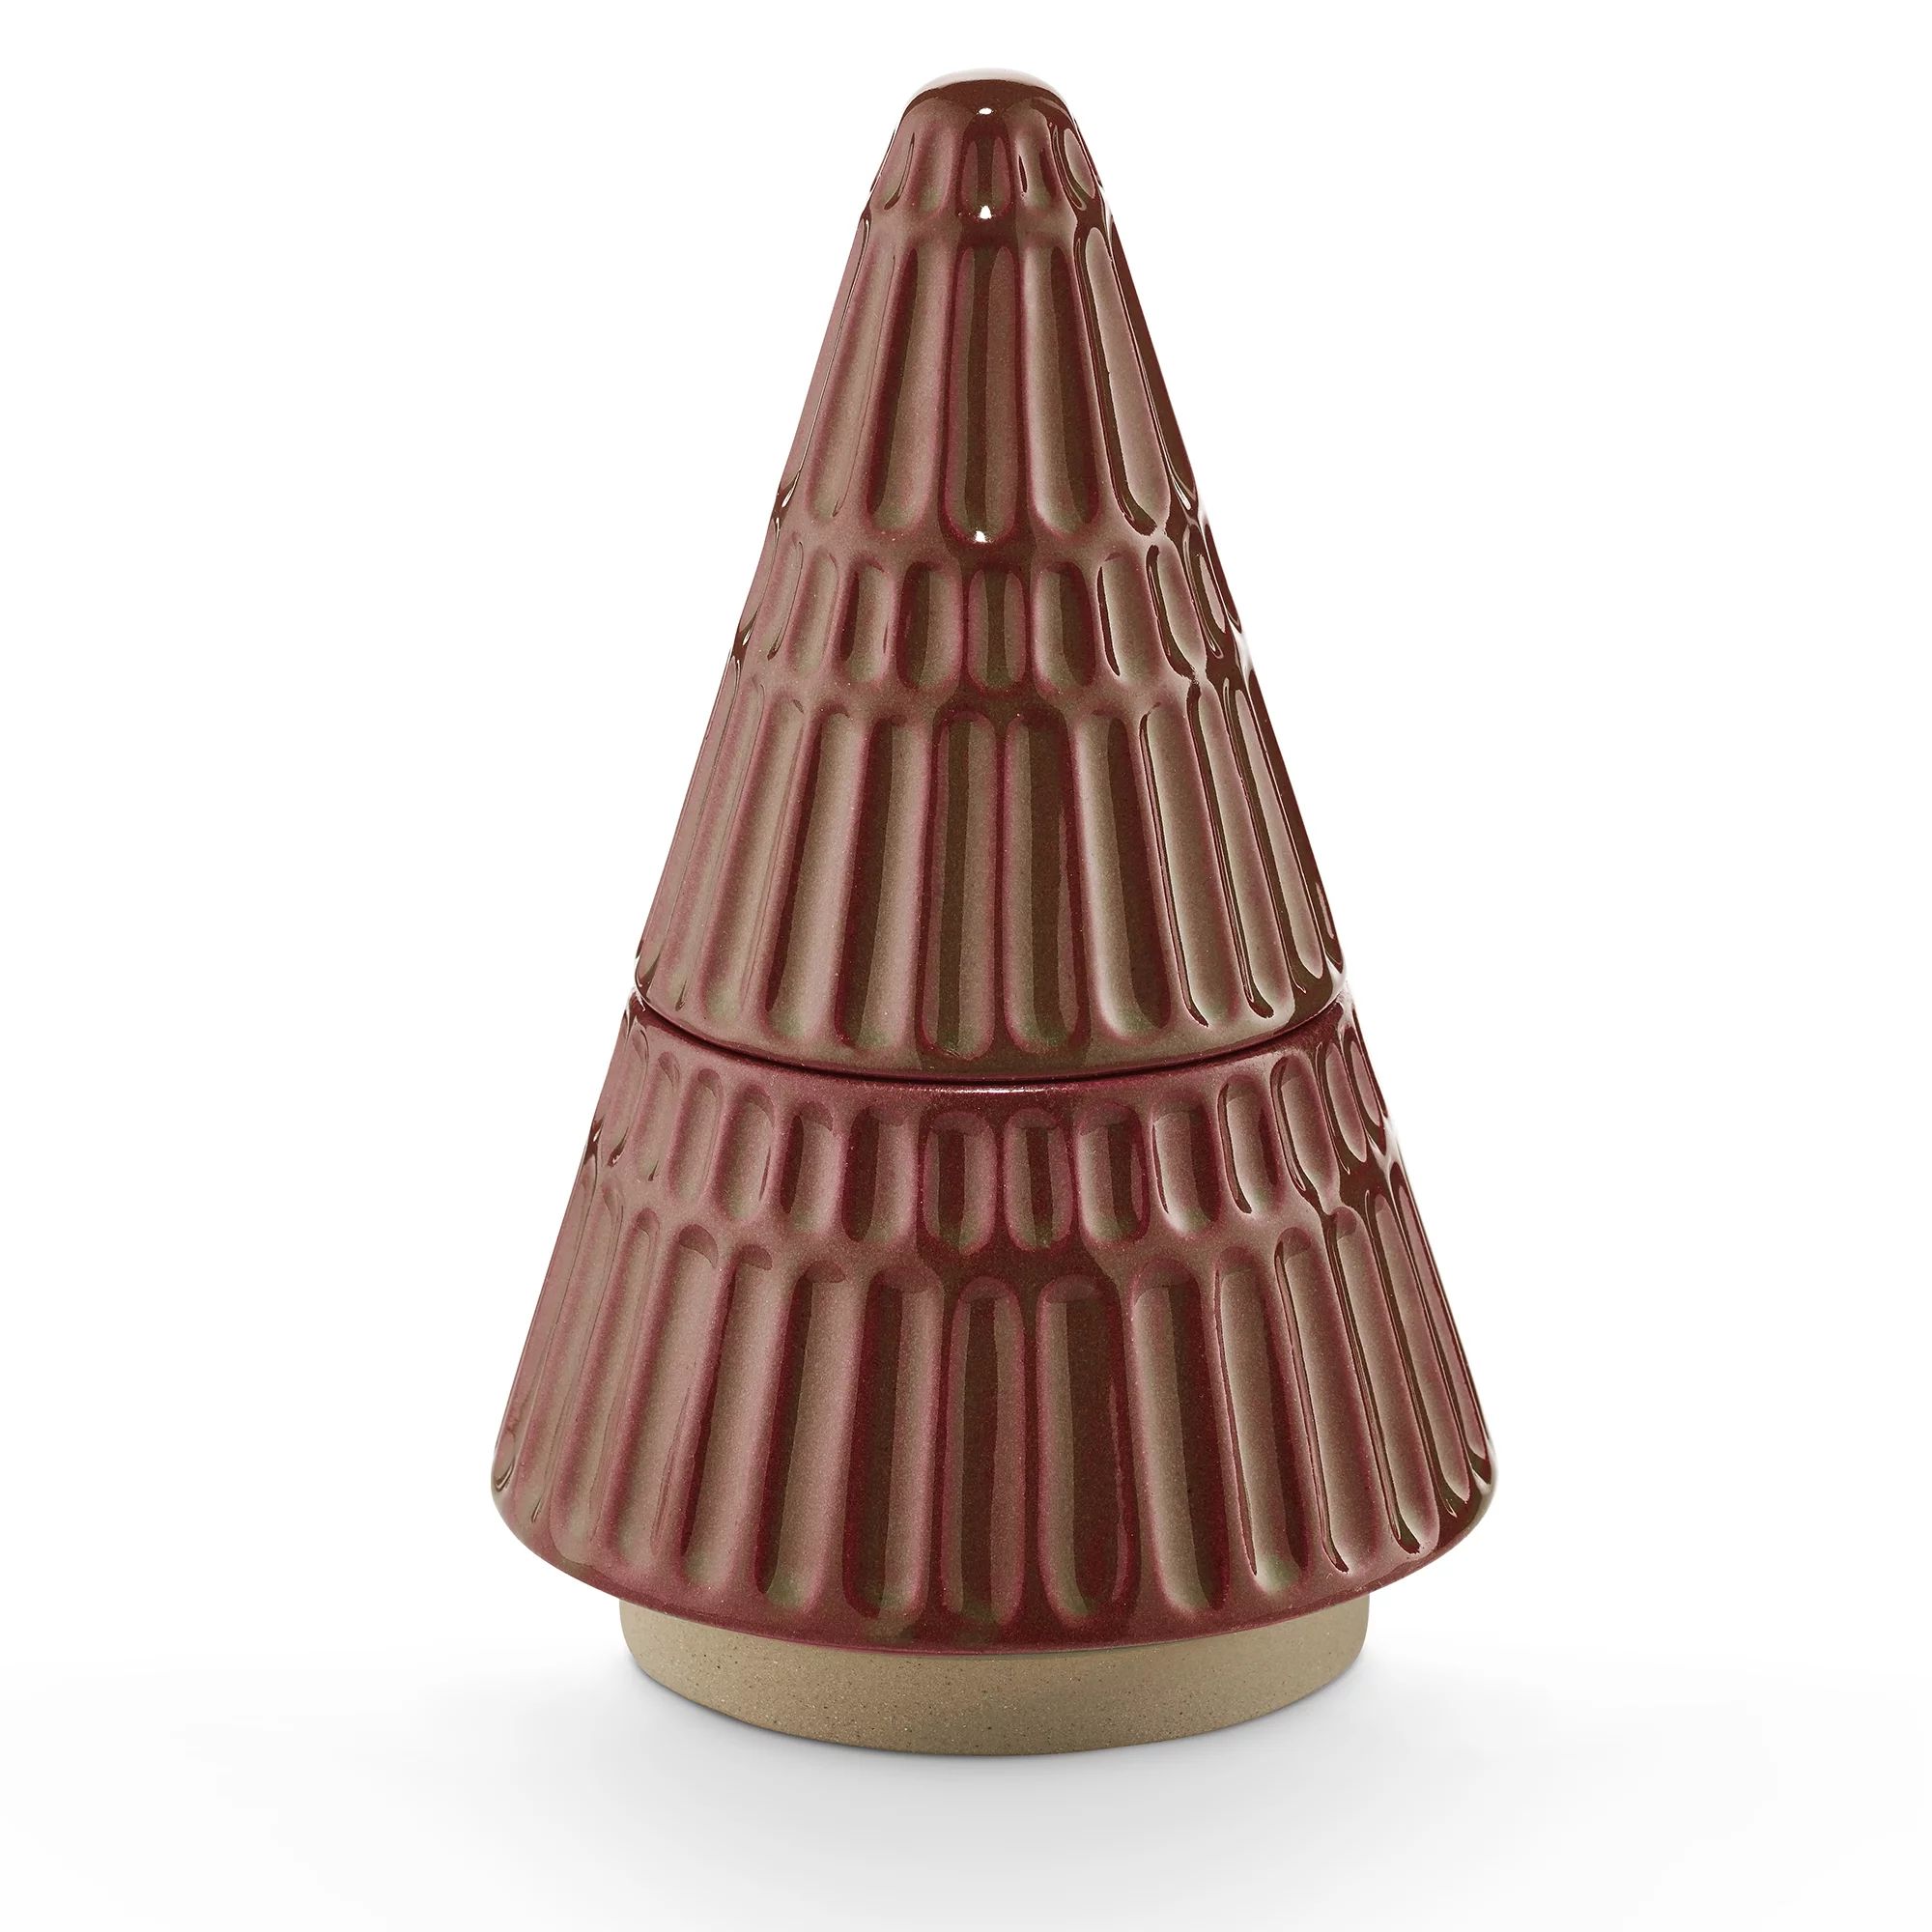 Better Homes & Gardens Cherry & Clove 8.5oz Scented Ceramic Tree Candle | Walmart (US)